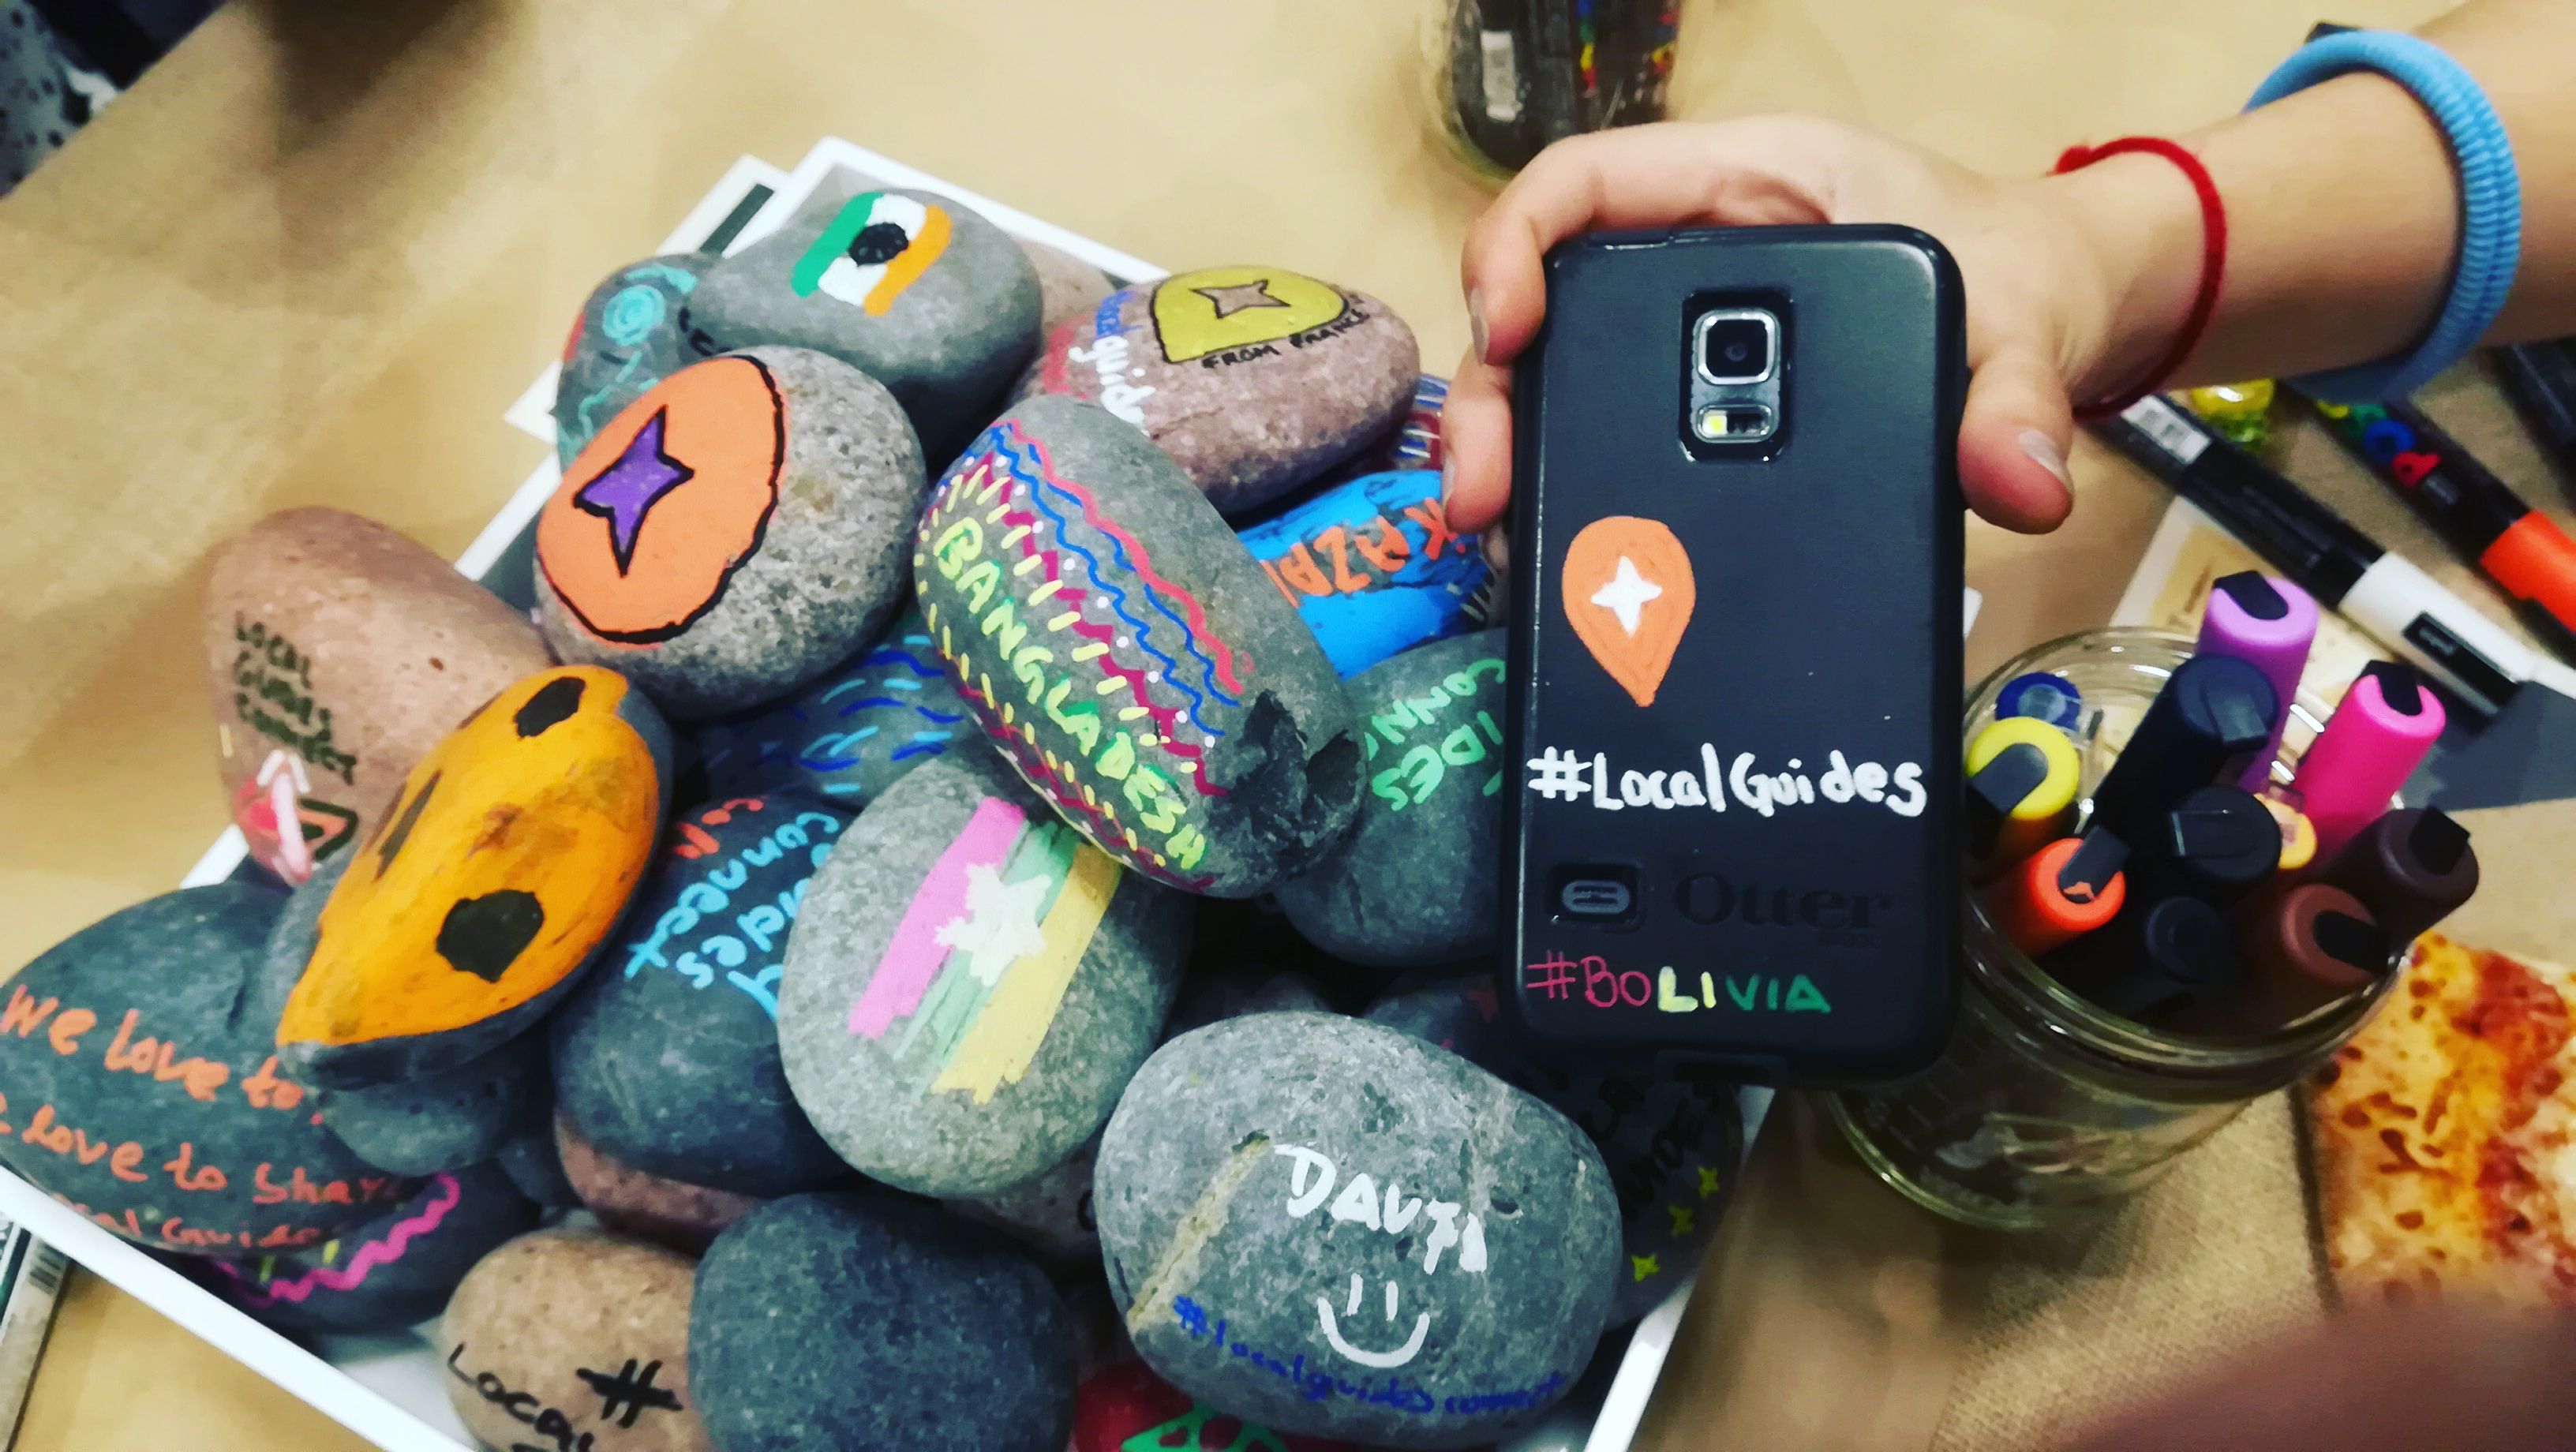 Caption: painted stones at Connect Live Lounge